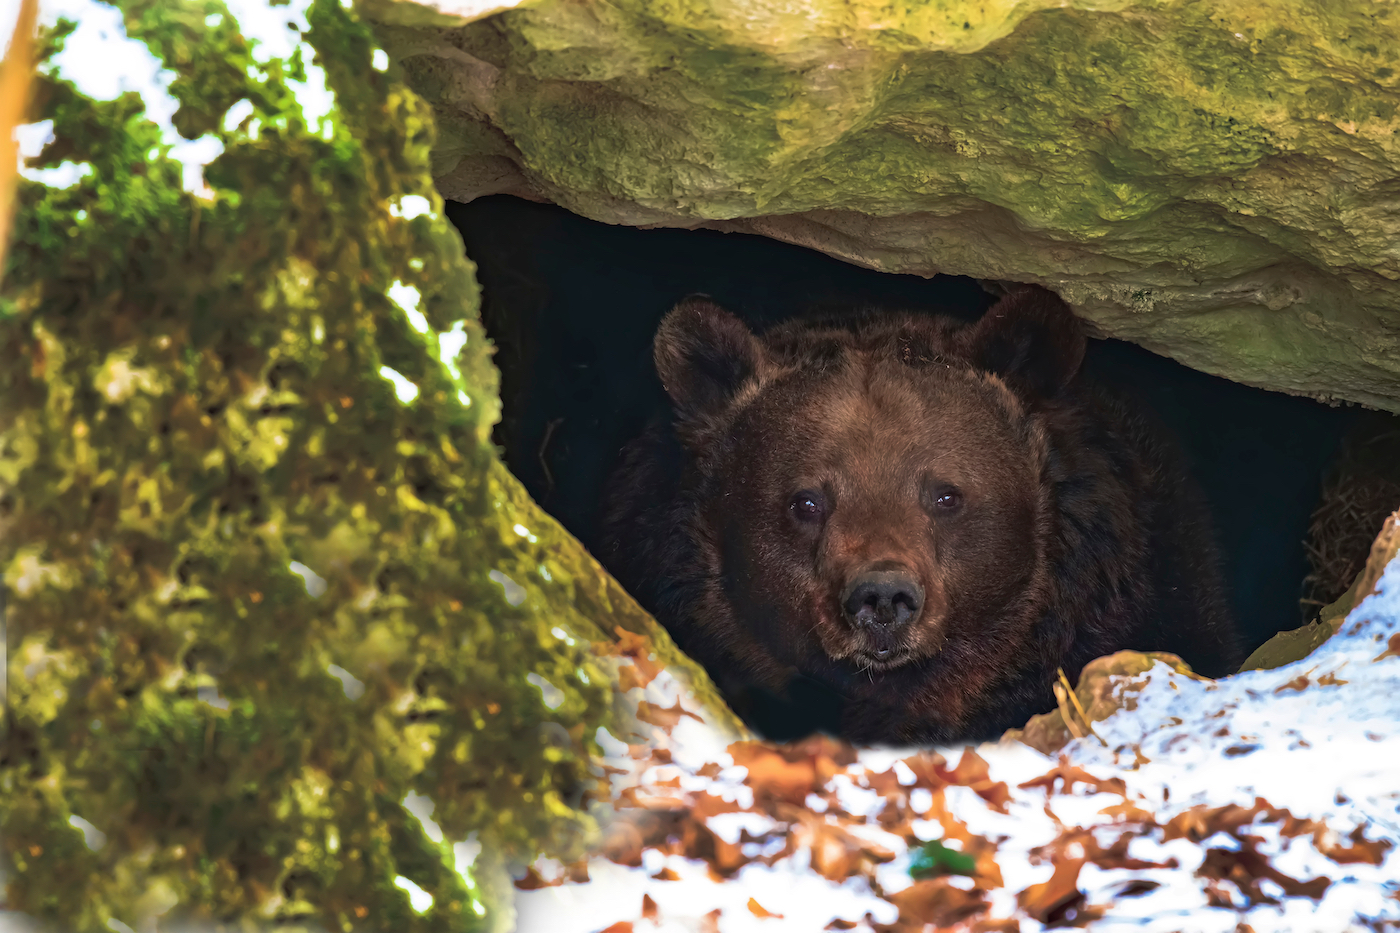 A brown bear peeking out of a cave crevice.